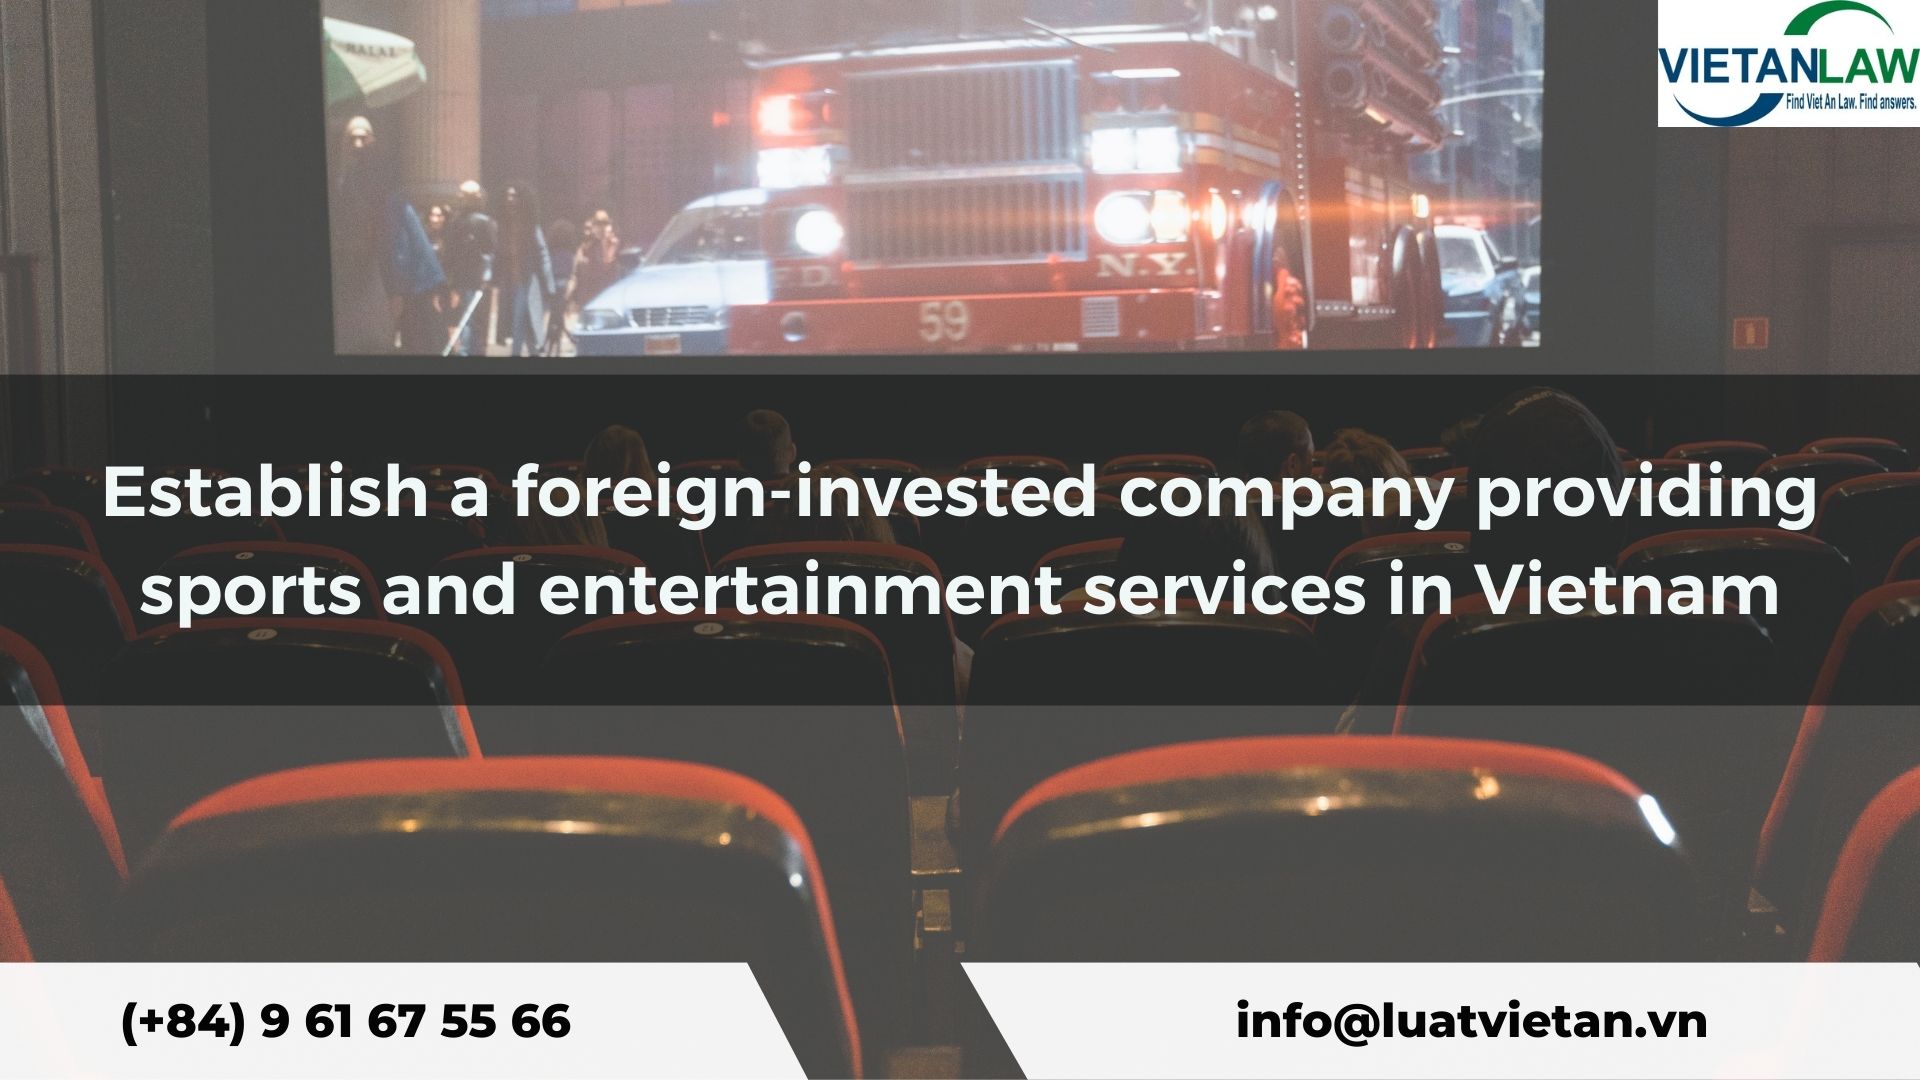 Establish a foreign-invested company providing sports and entertainment services in Vietnam